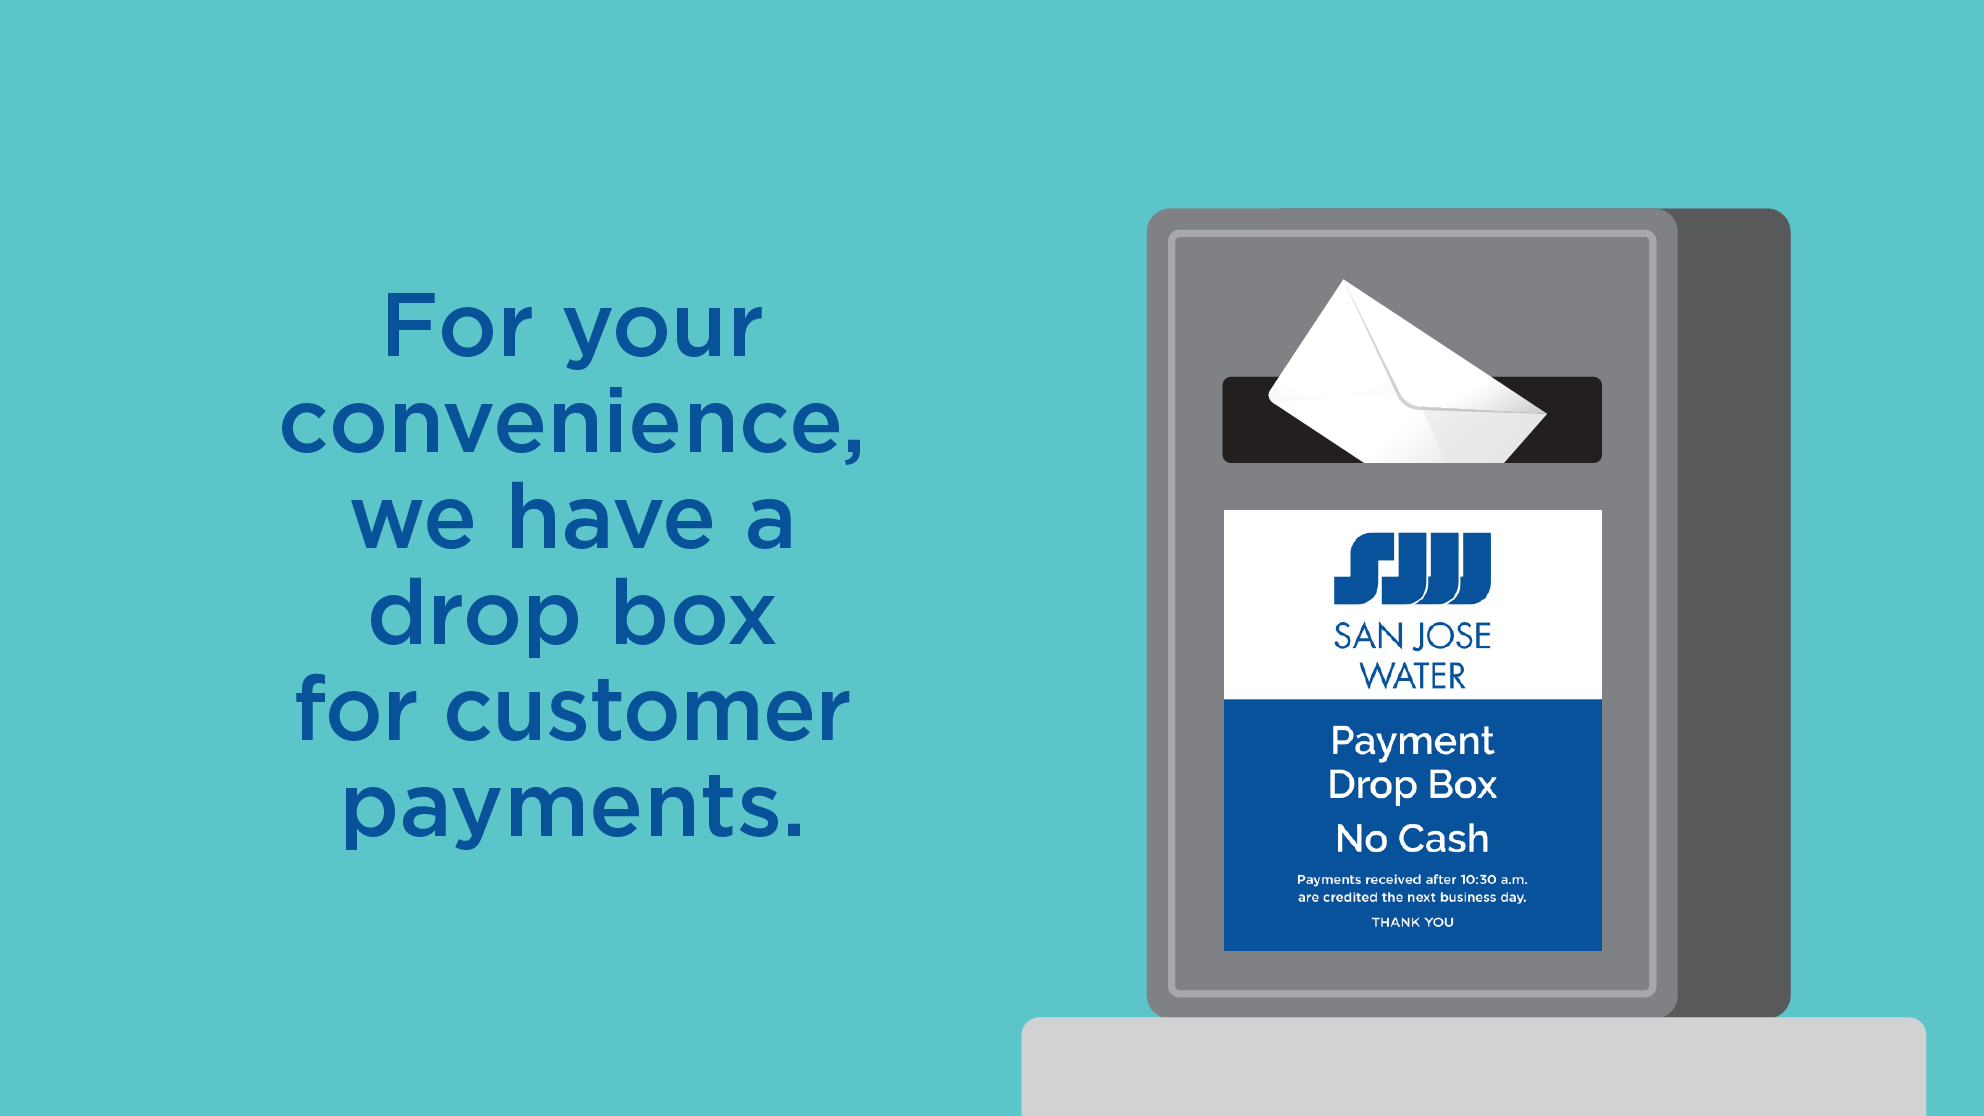 Graphic of drop box with text "for your convenience, we have a drop box for customer payments."